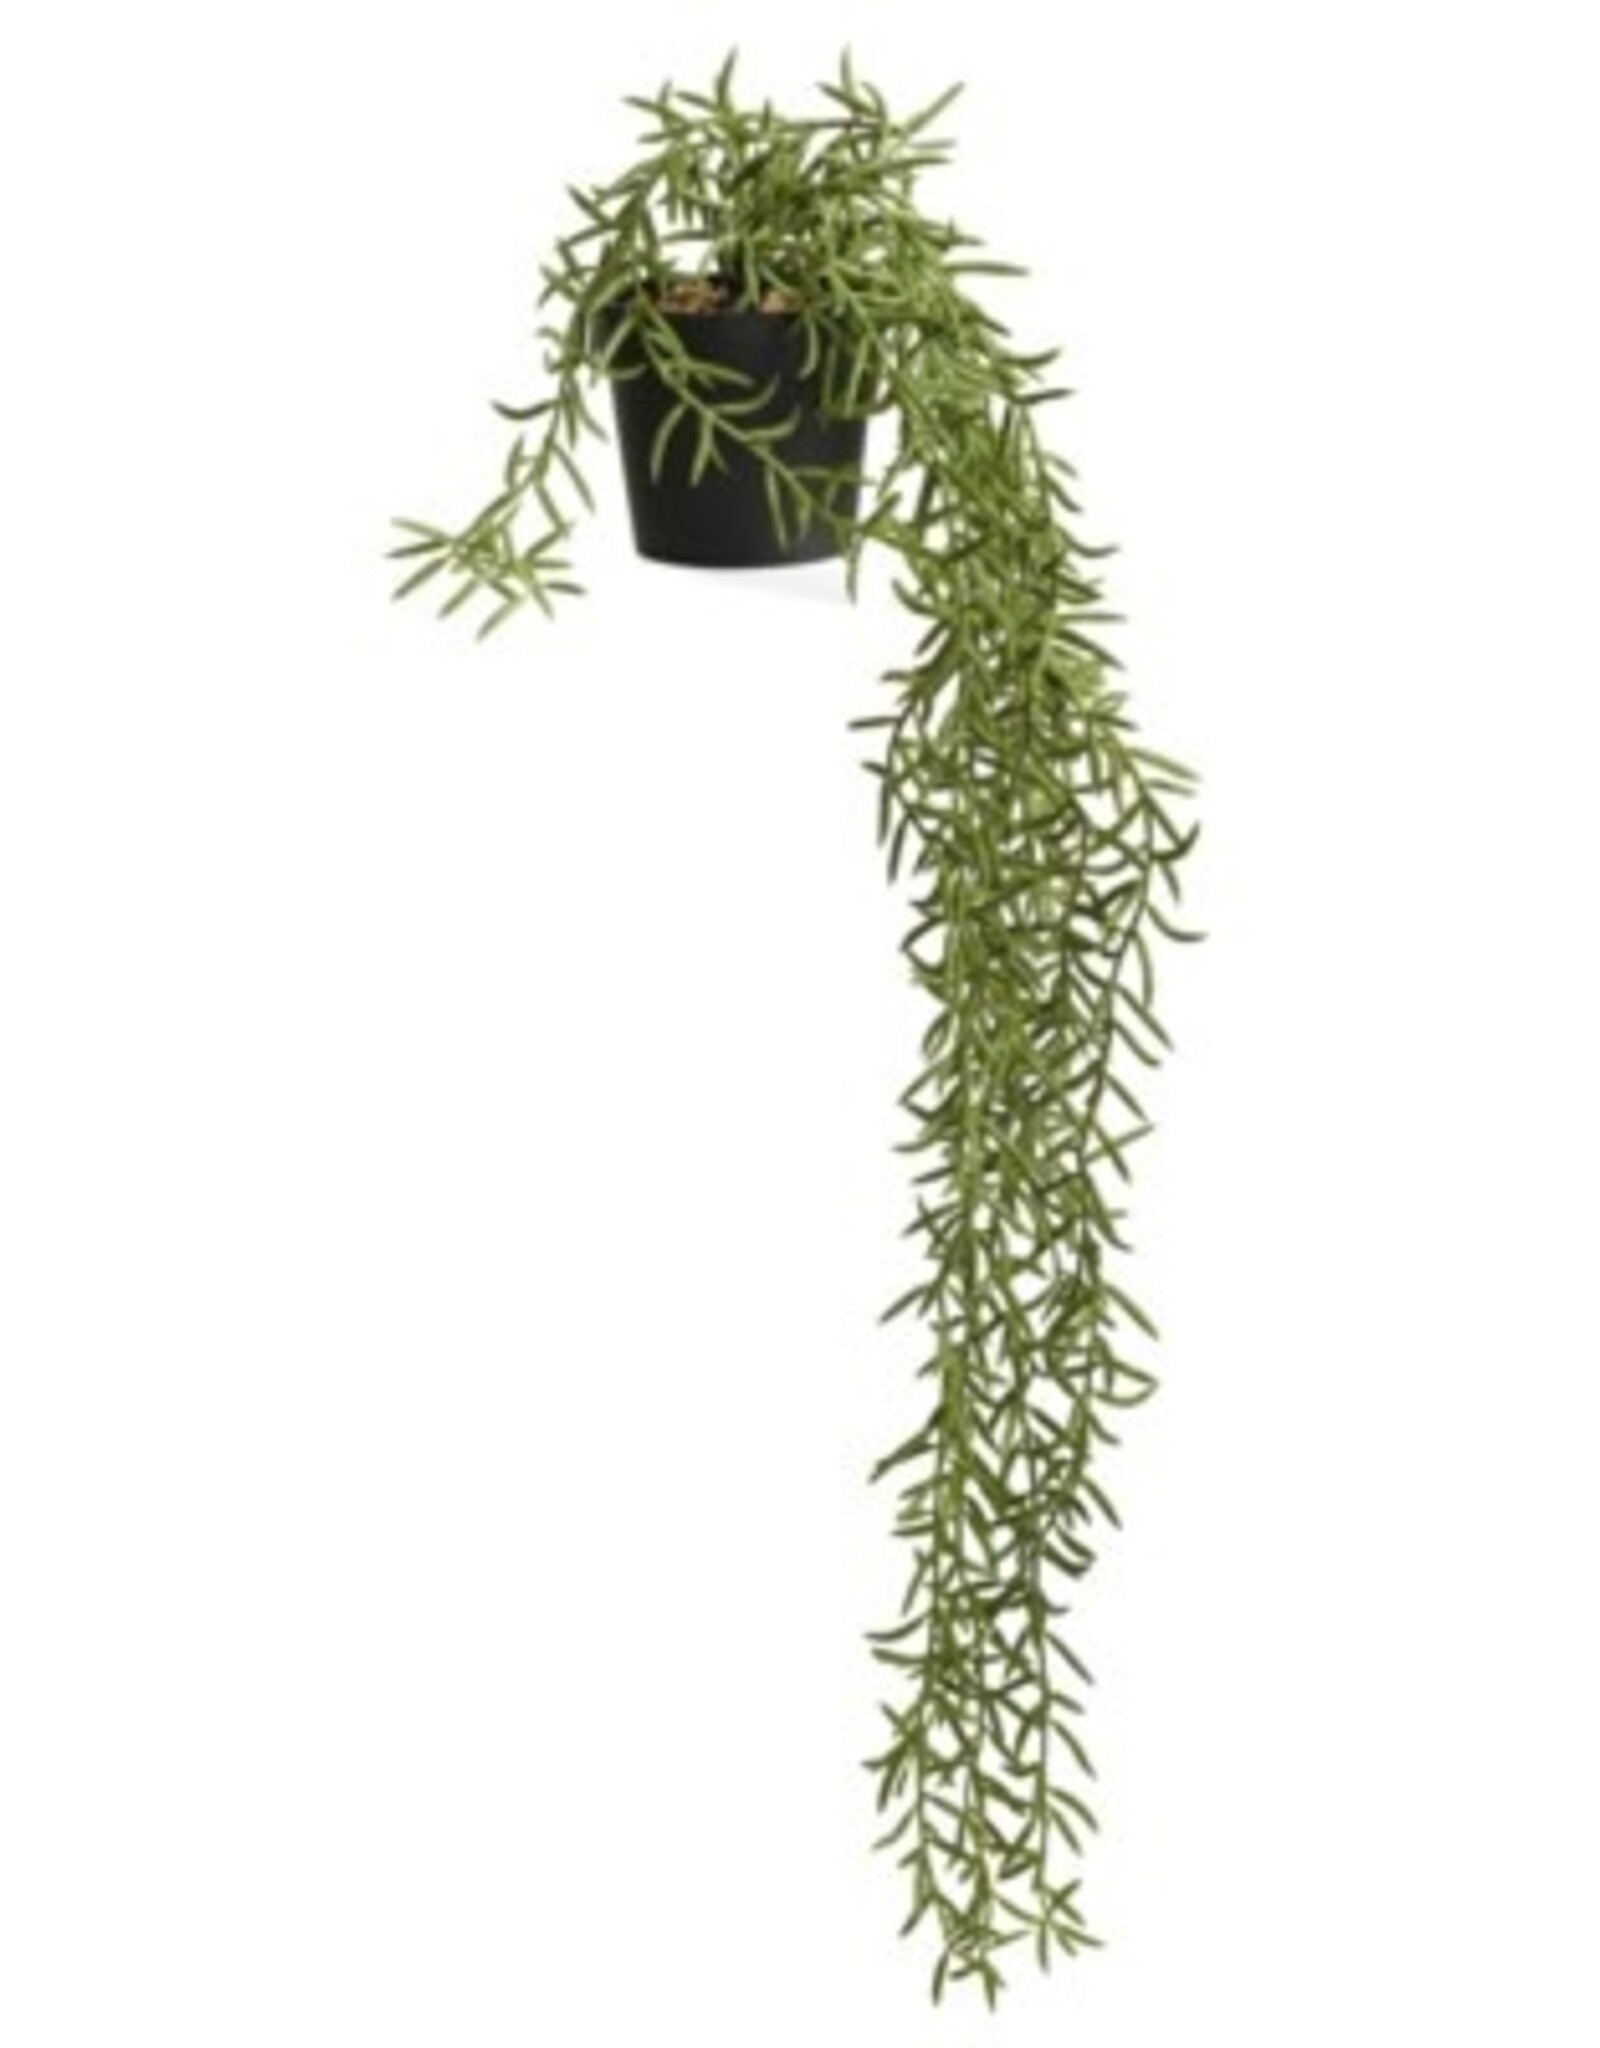 Plant PC Potted Rosemary 1050247